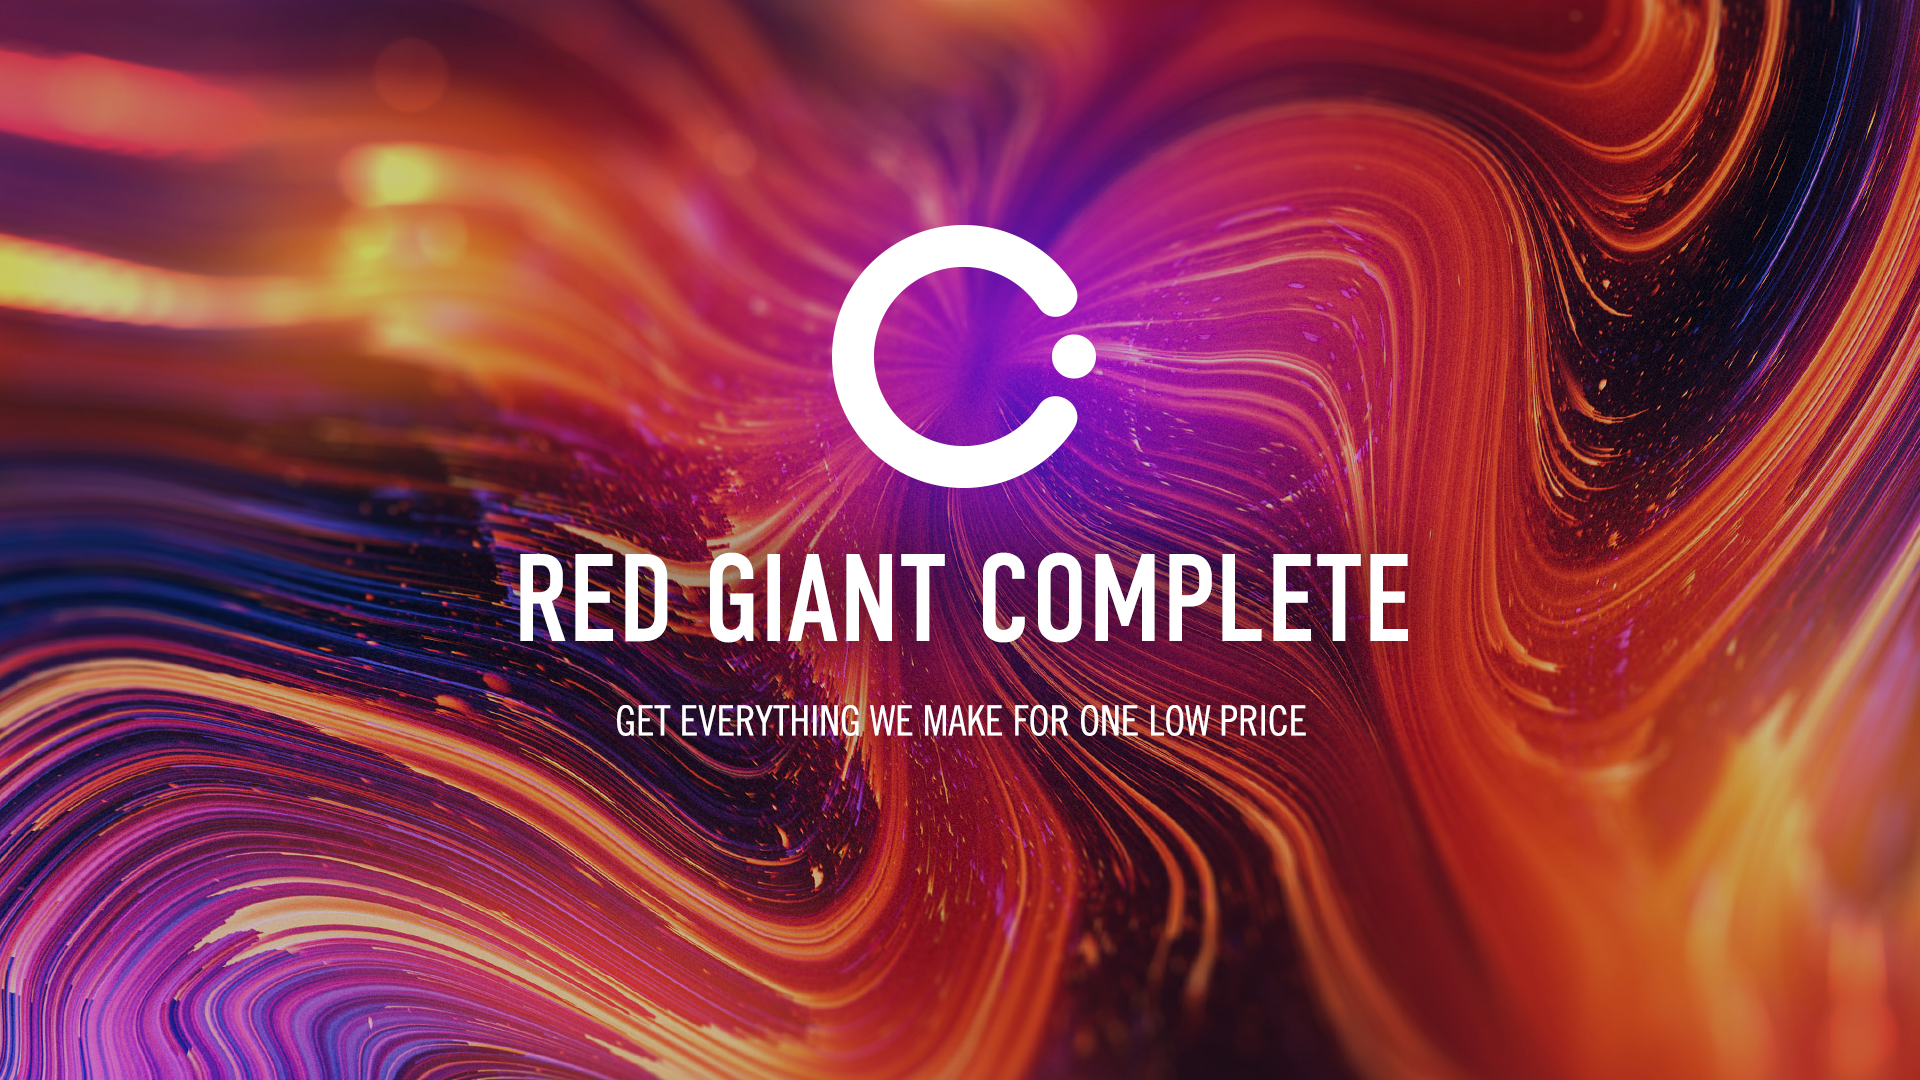 Red Giant Complete for Individuals, Students and Teachers.